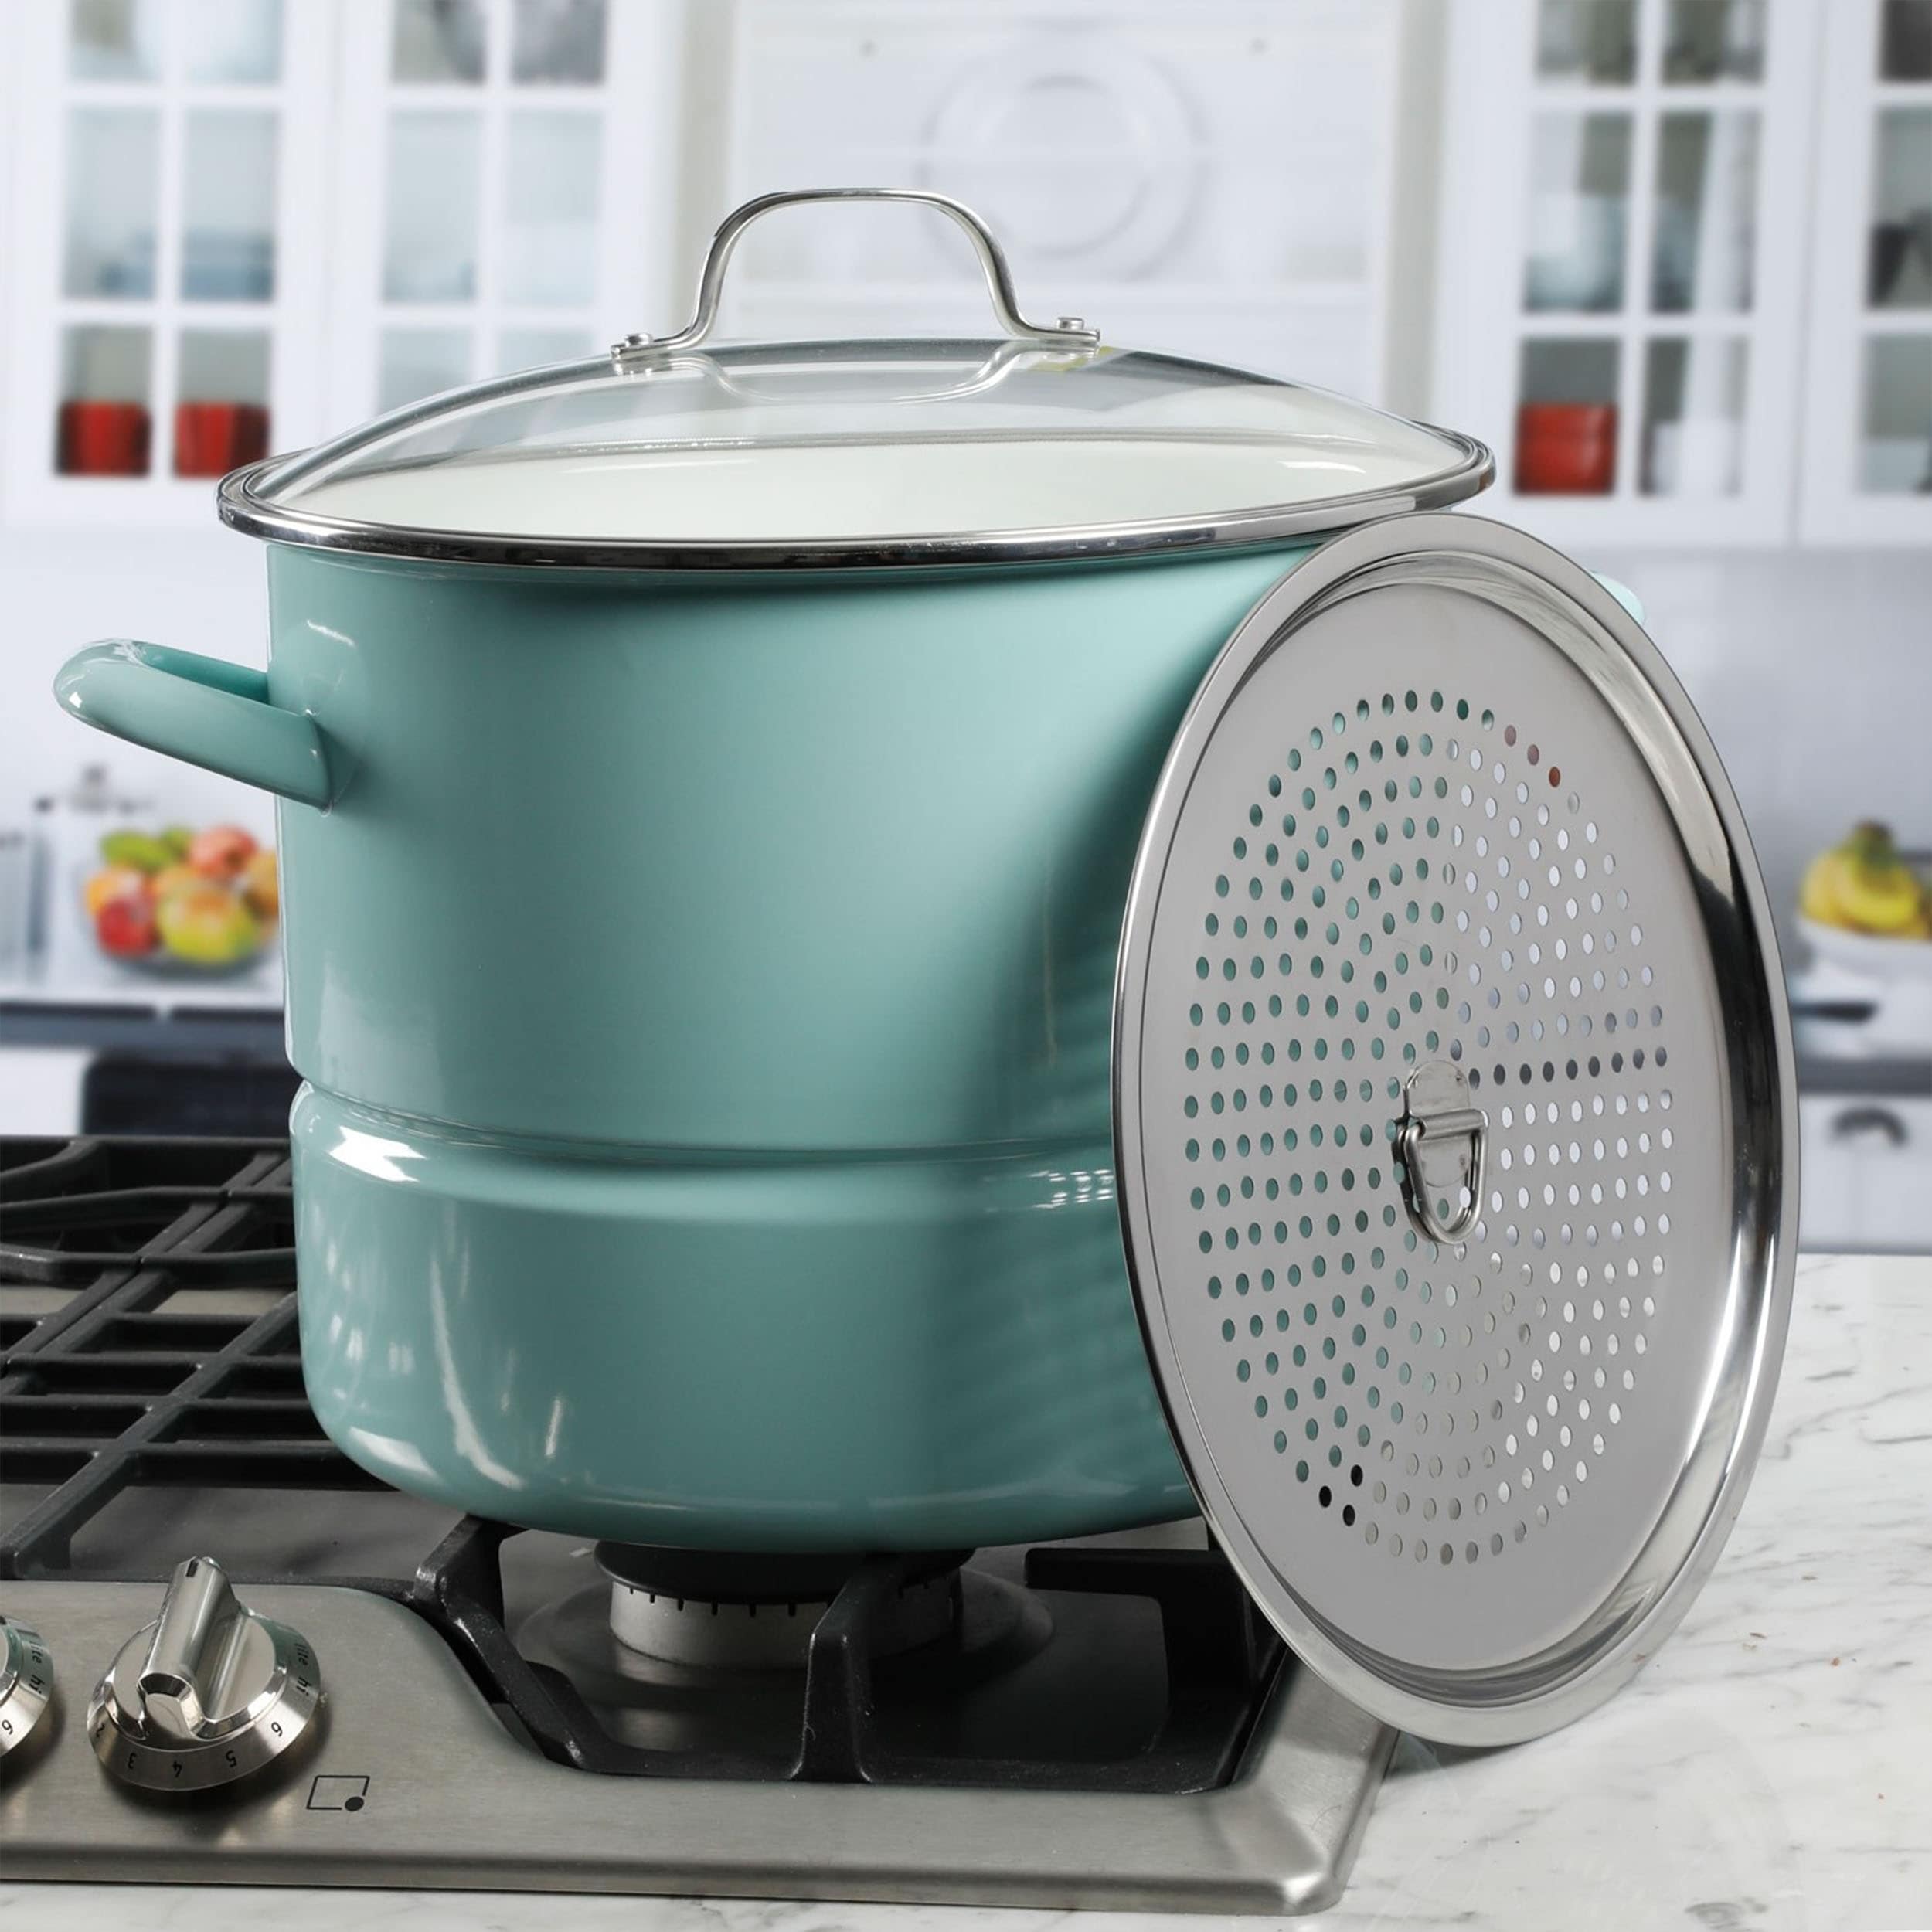 64 Cup Stainless Steel Steamer Pot with Lid in Light Teal - Bed